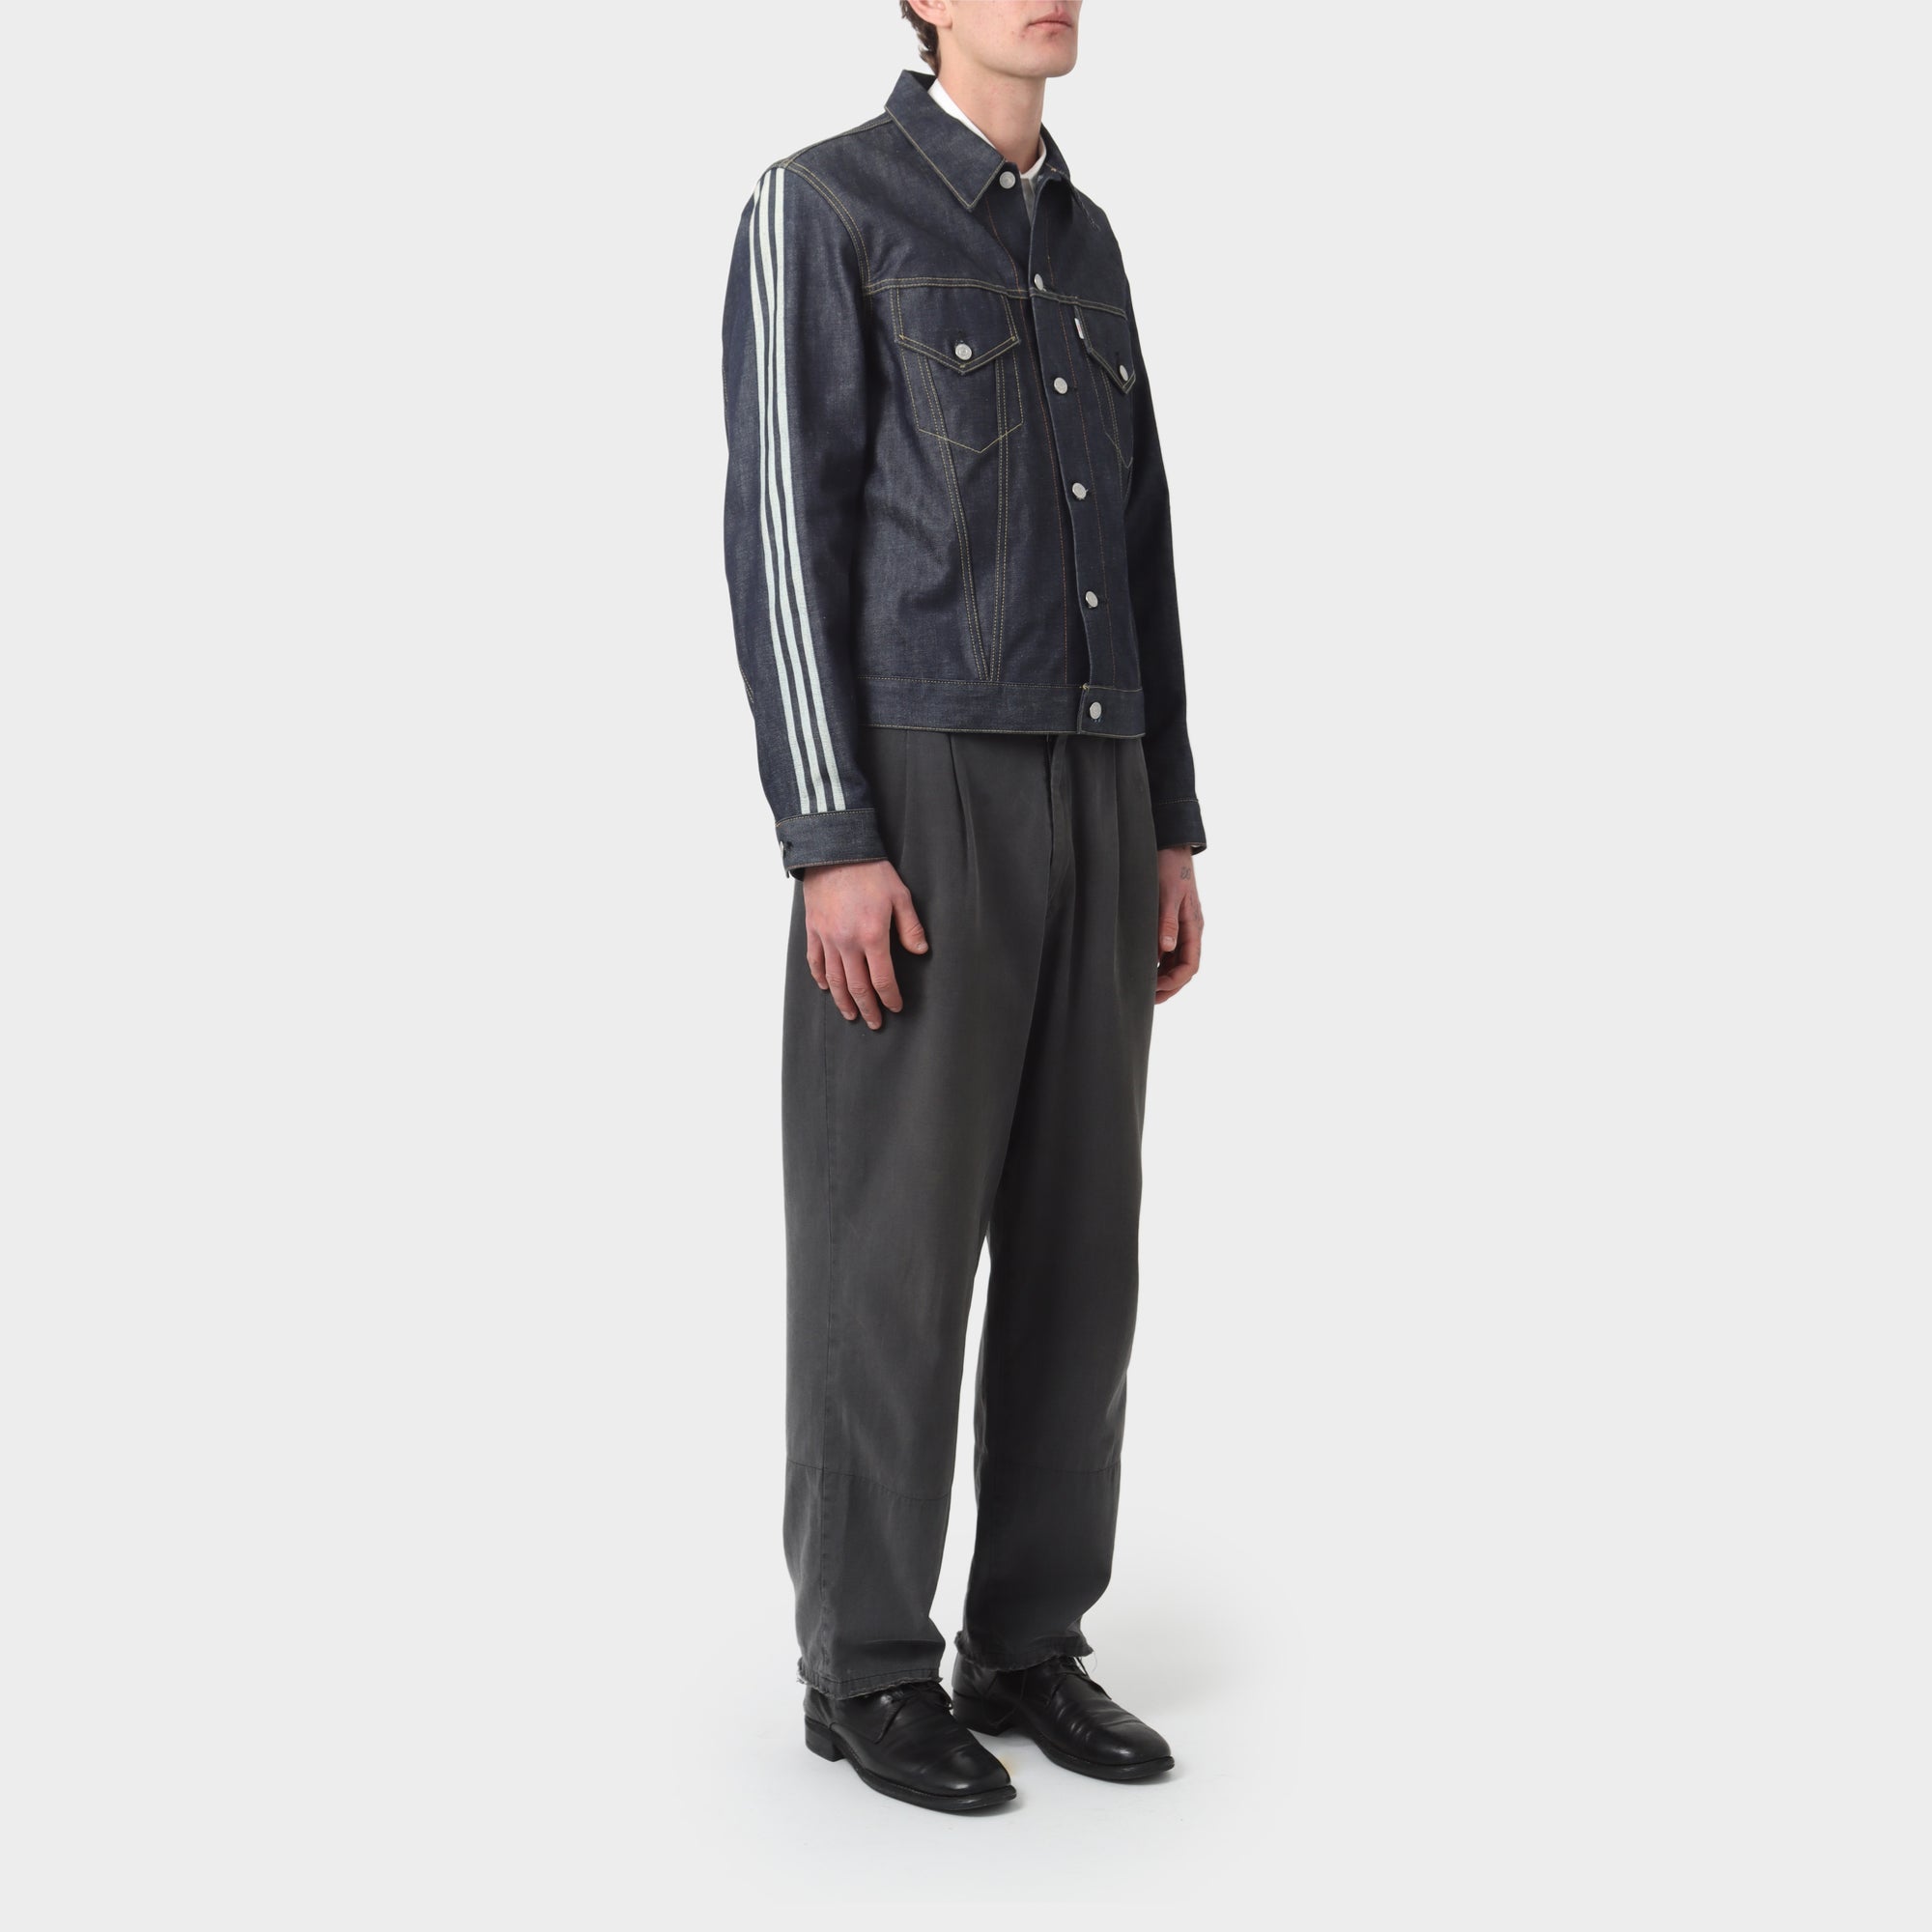 Y-3 Denim Jacket with Embroidered Sleeve Stripes